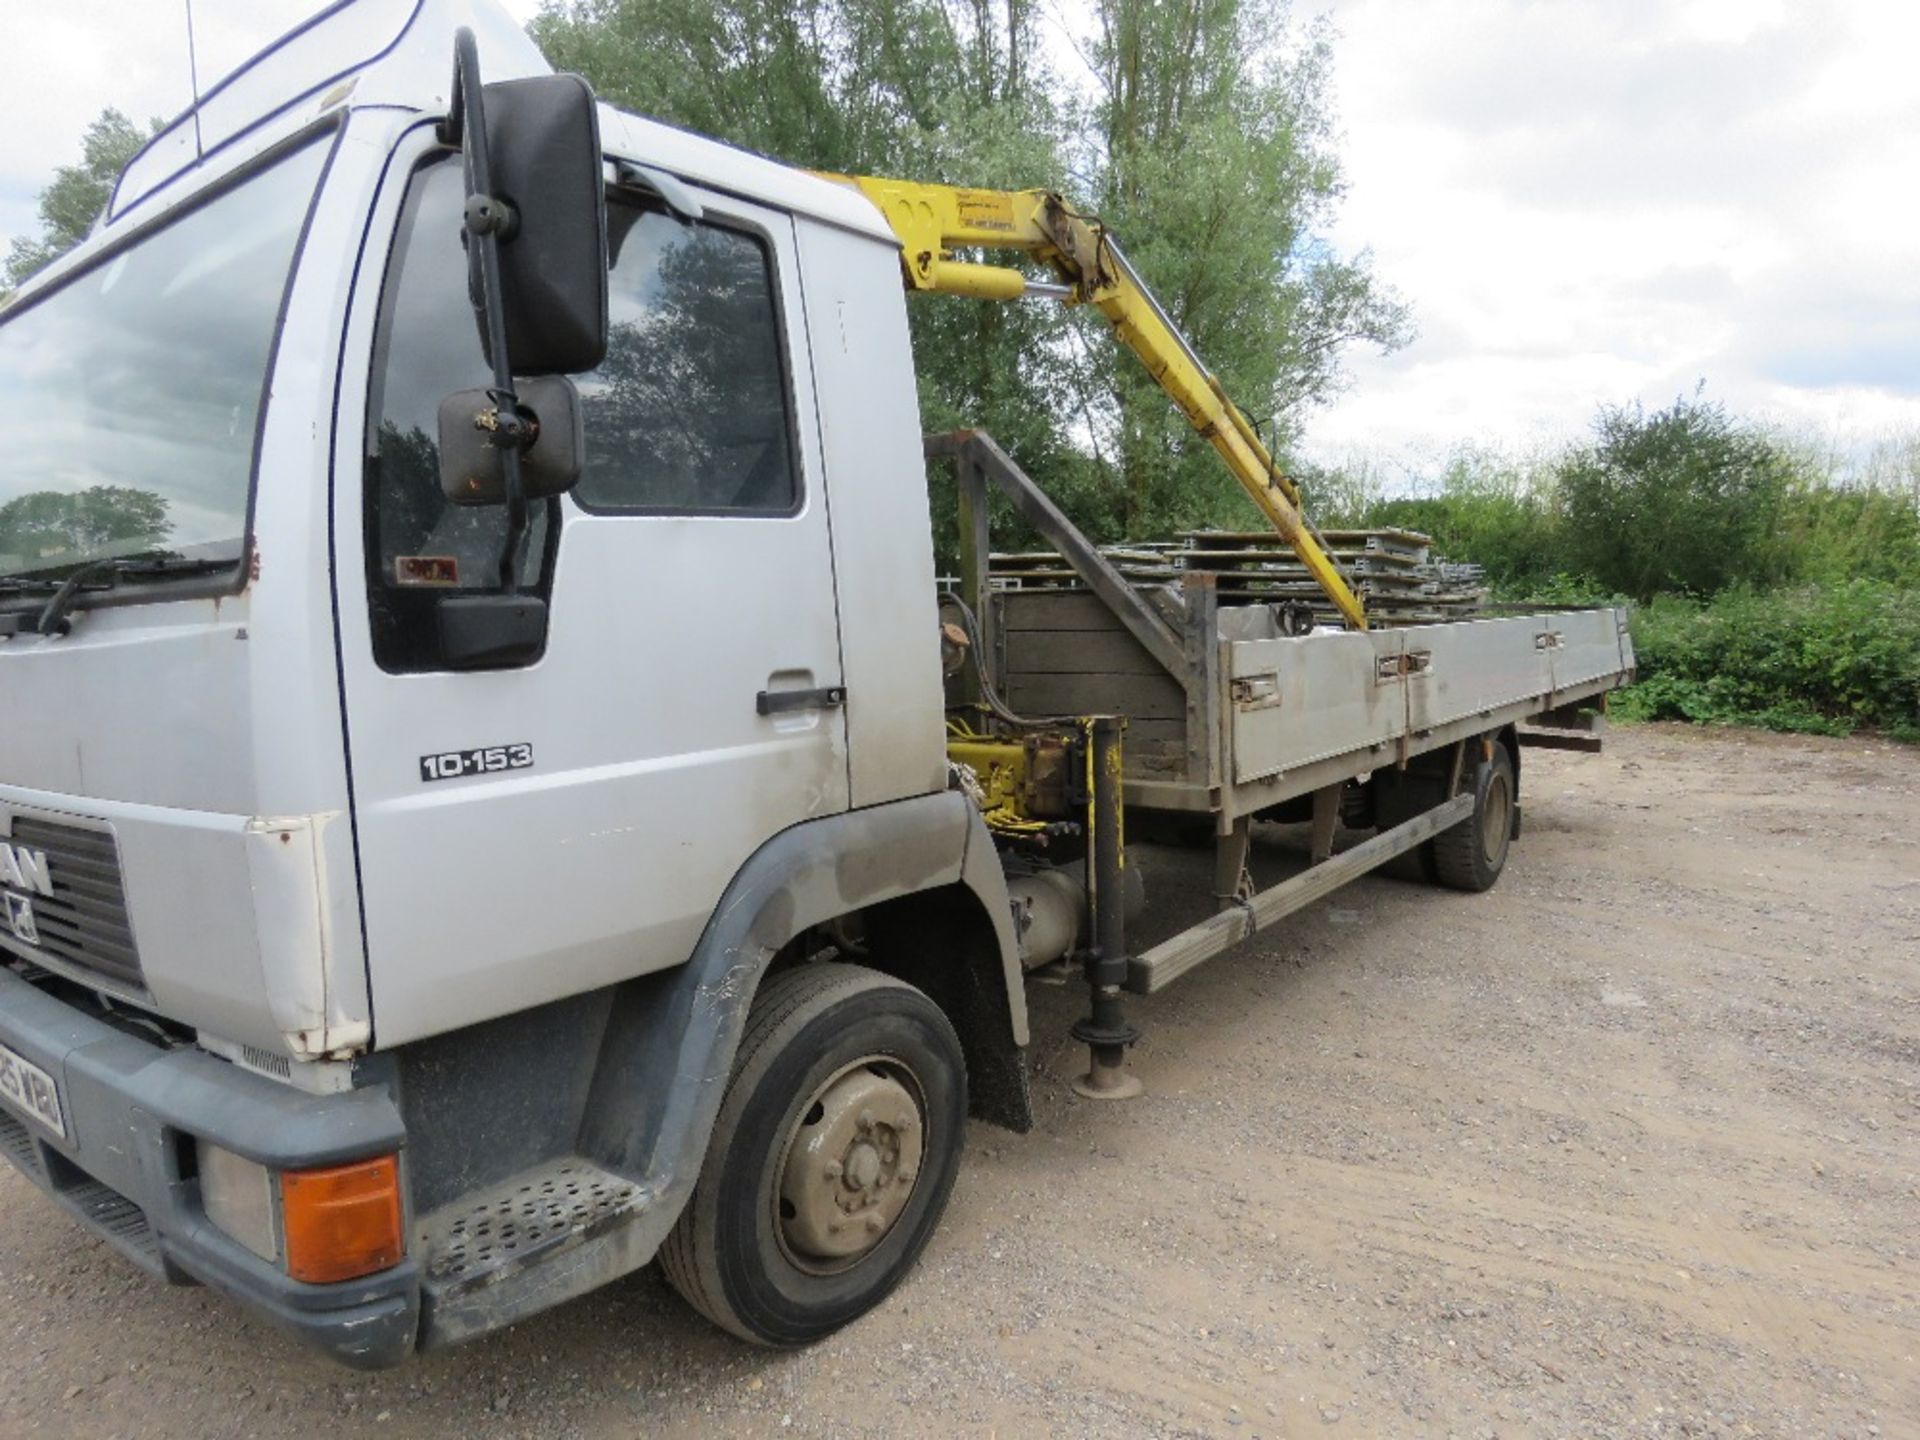 MAN 10-153 FLAT BED LORRY WITH HIAB CRANE REG:N825 WBU. 22FT BED APPROX. MANUAL GEARBOX. WHEN TESTE - Image 5 of 20